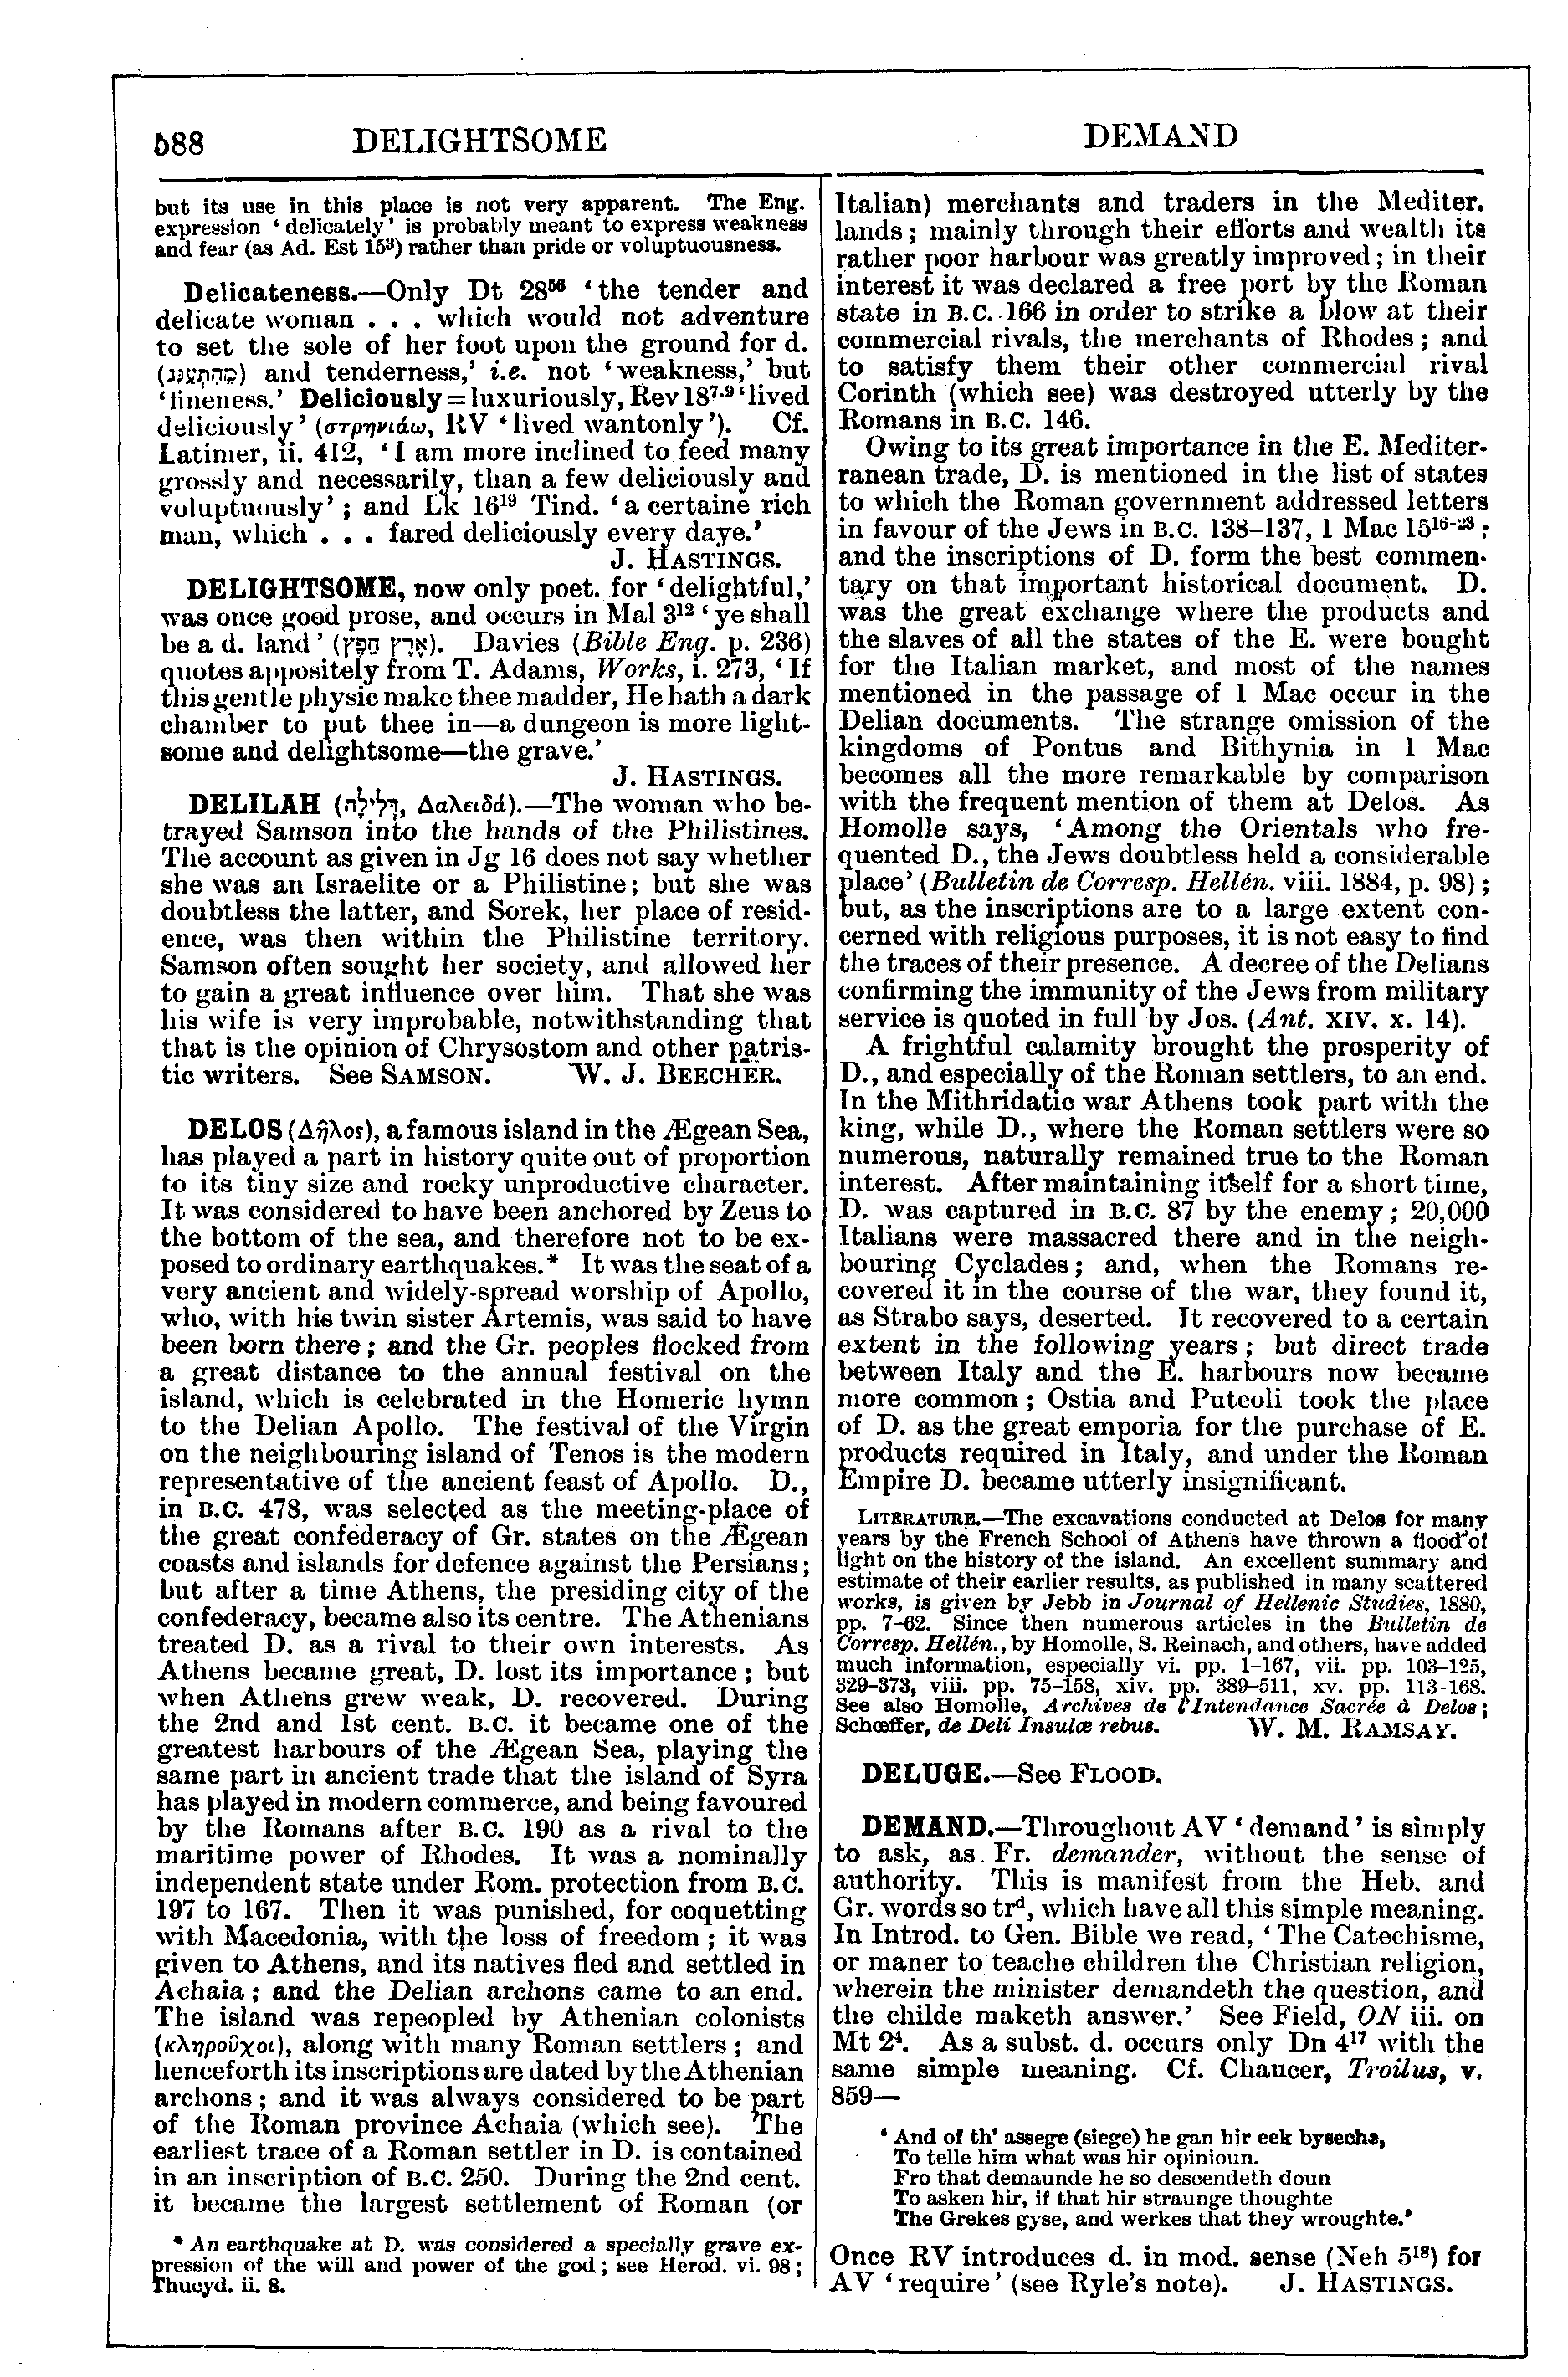 Image of page 588